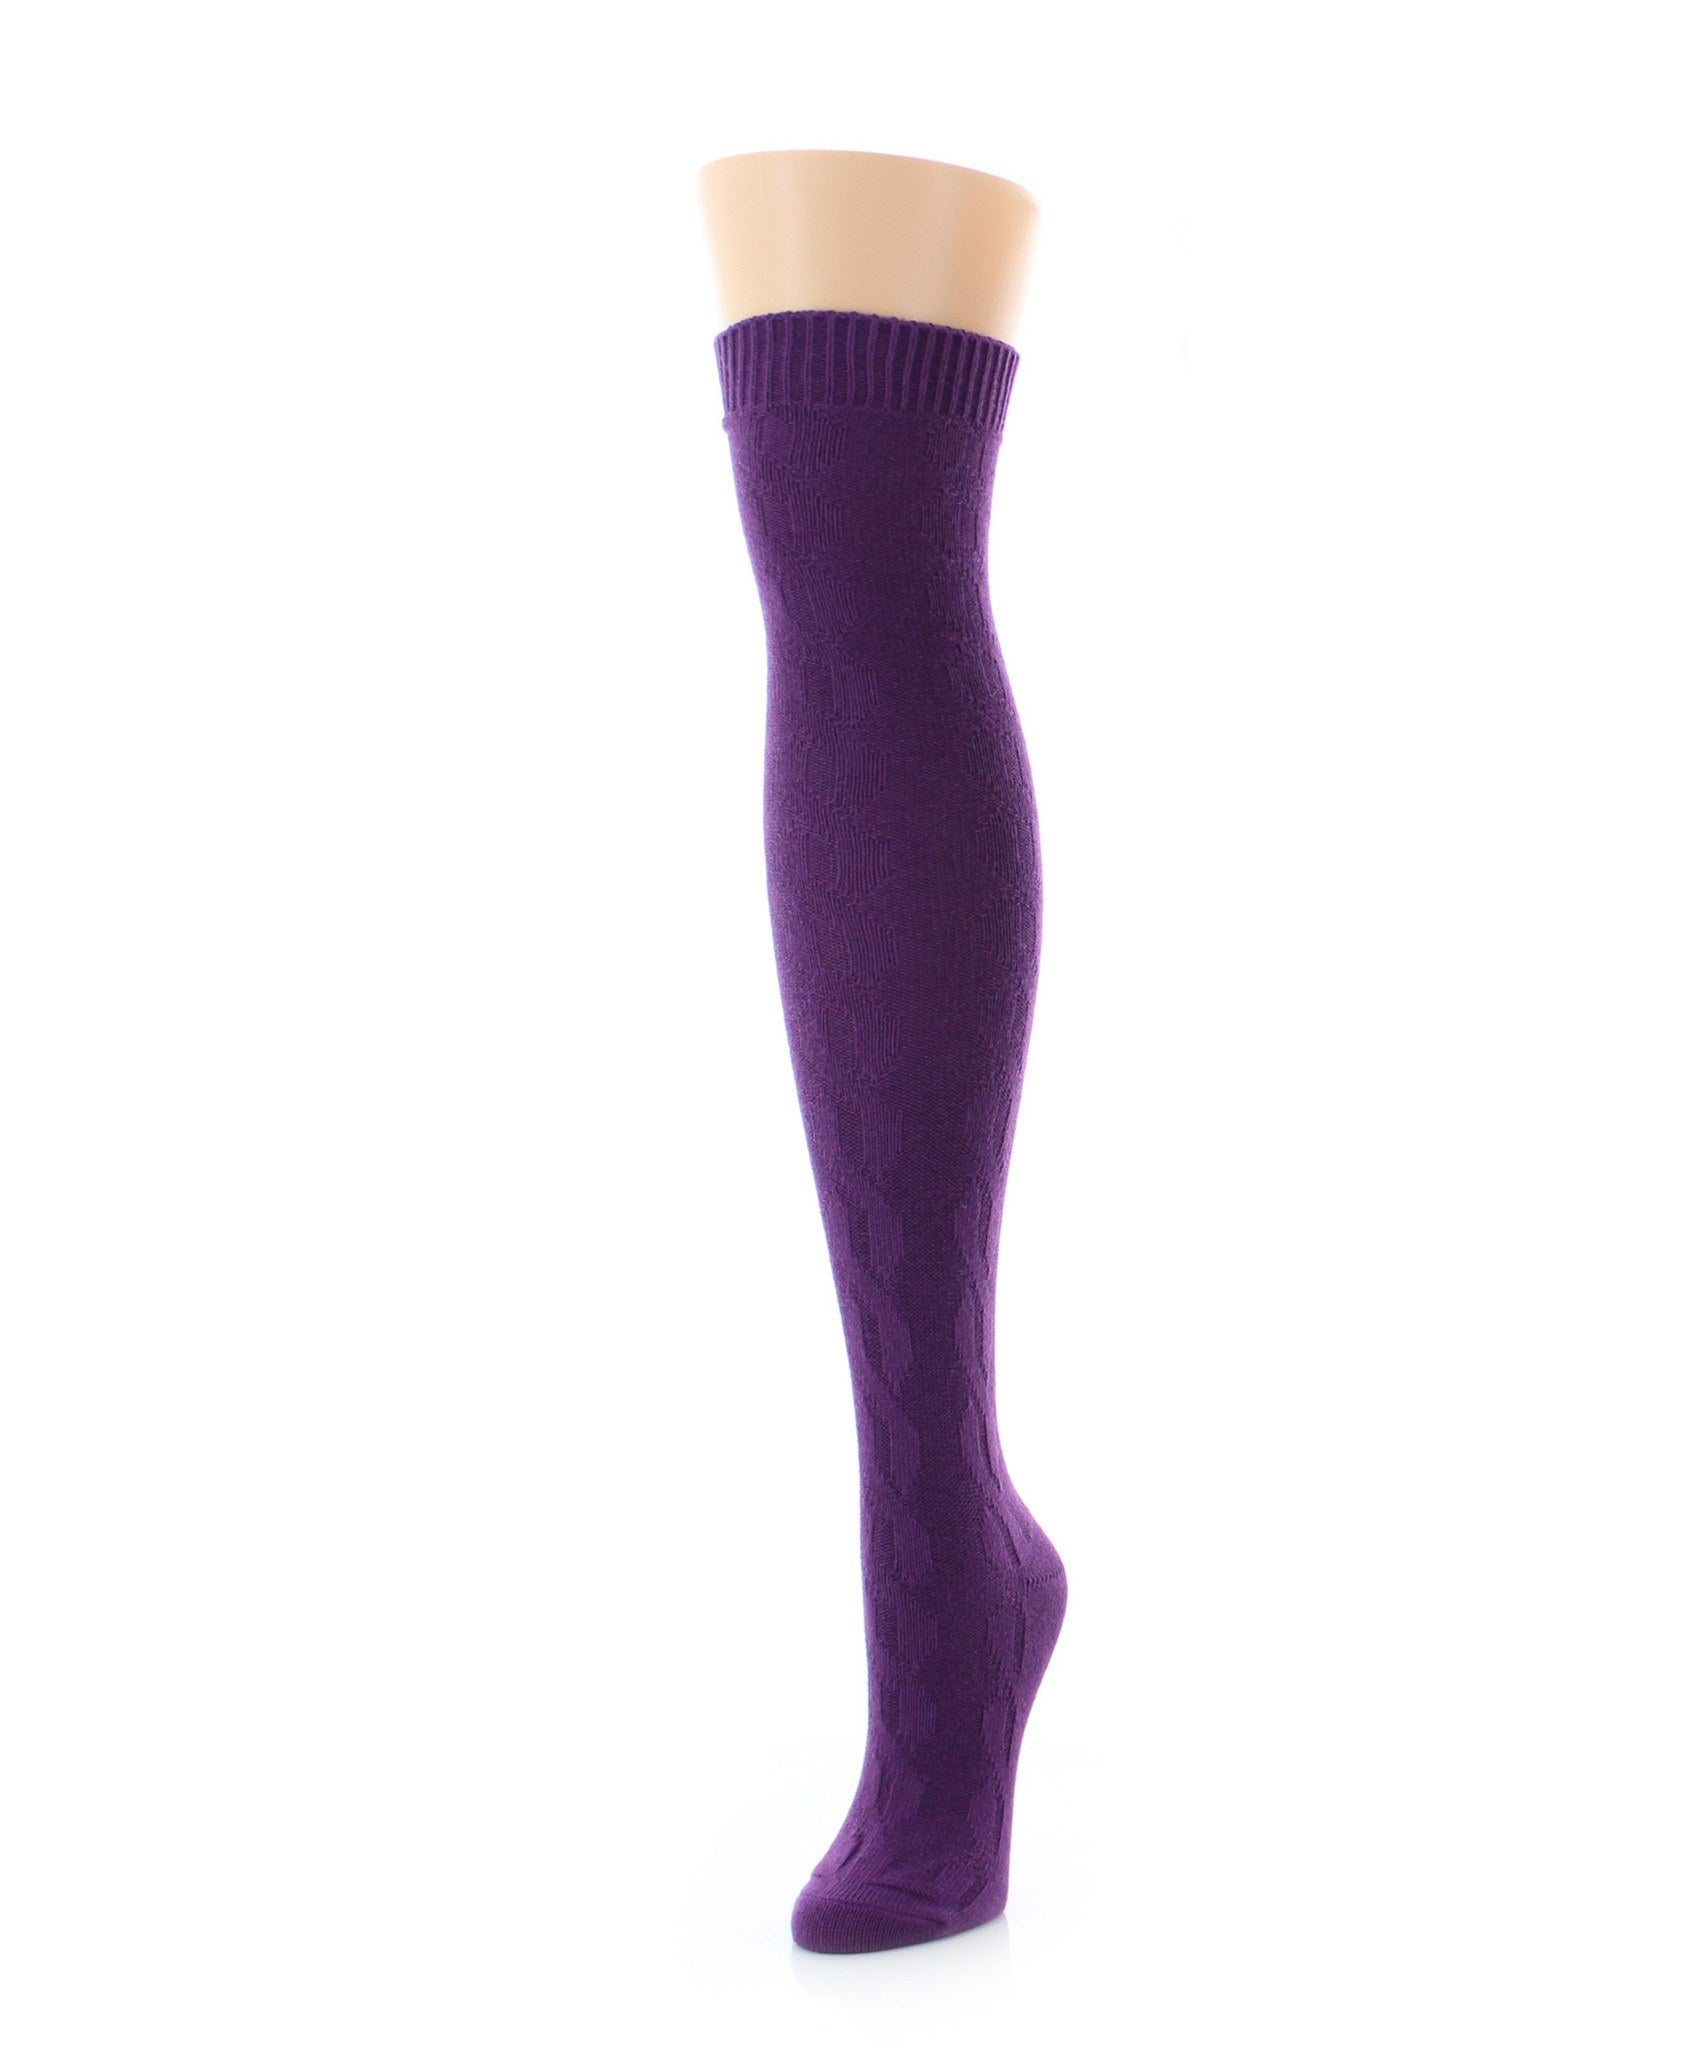 Jumbo Cable Over The Knee Cotton Blend Warm Socks